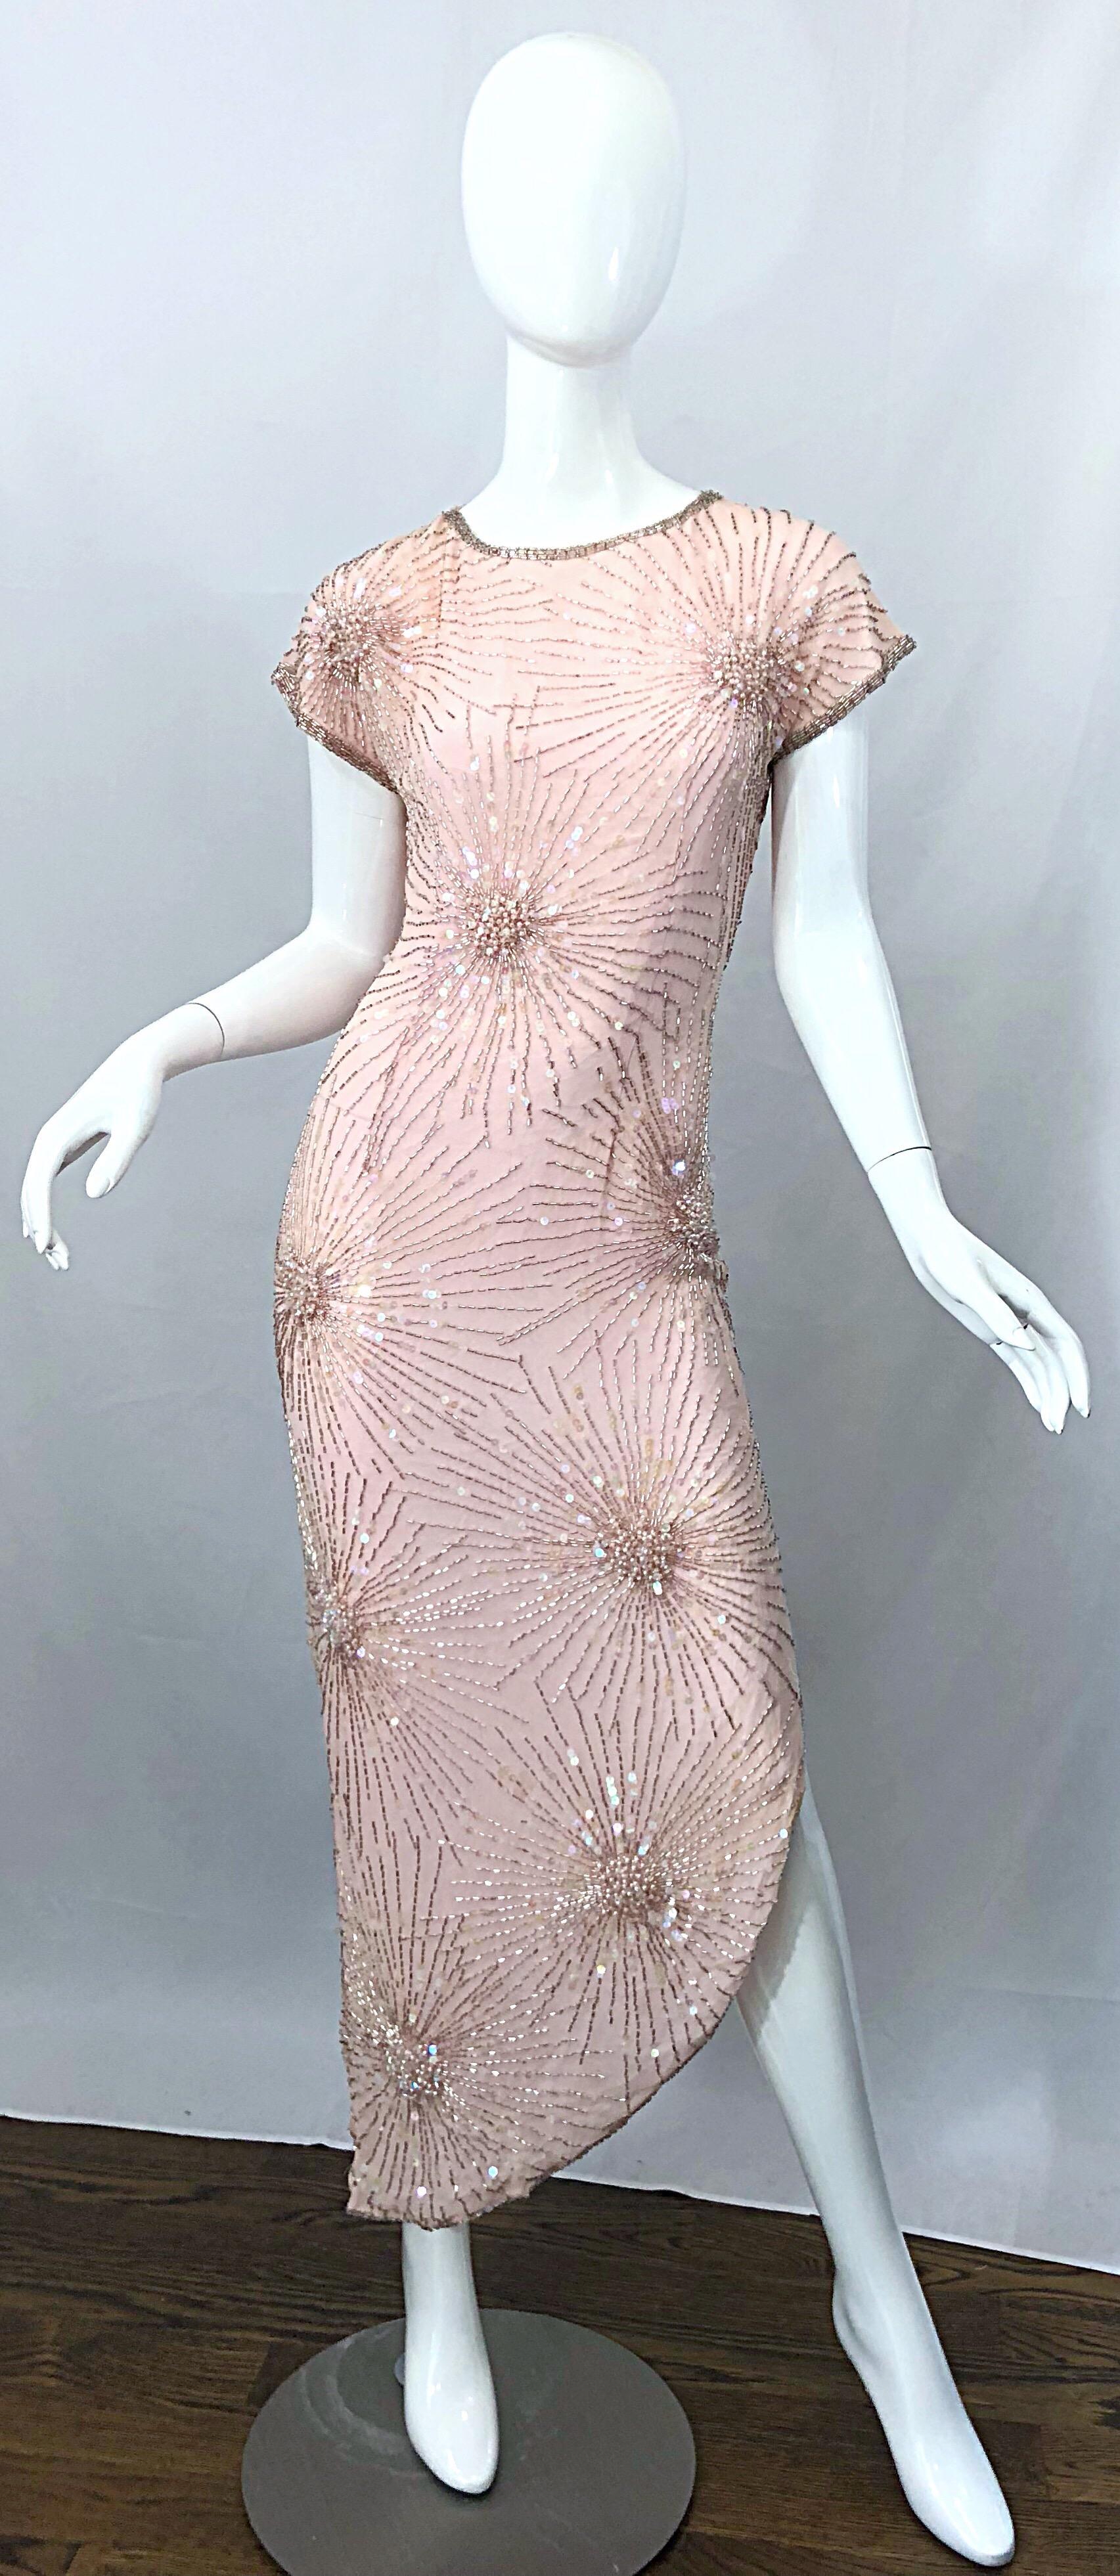 Gorgeous LILLIE RUBIN light pale pink silk chiffon beaded, sequined and pearl encrusted asymmetrical gown! Though no Halston, the Lillie Rubin boutique in Beverly Hills carried his pieces, and this is a dead ringer for his infamous 'fireworks'